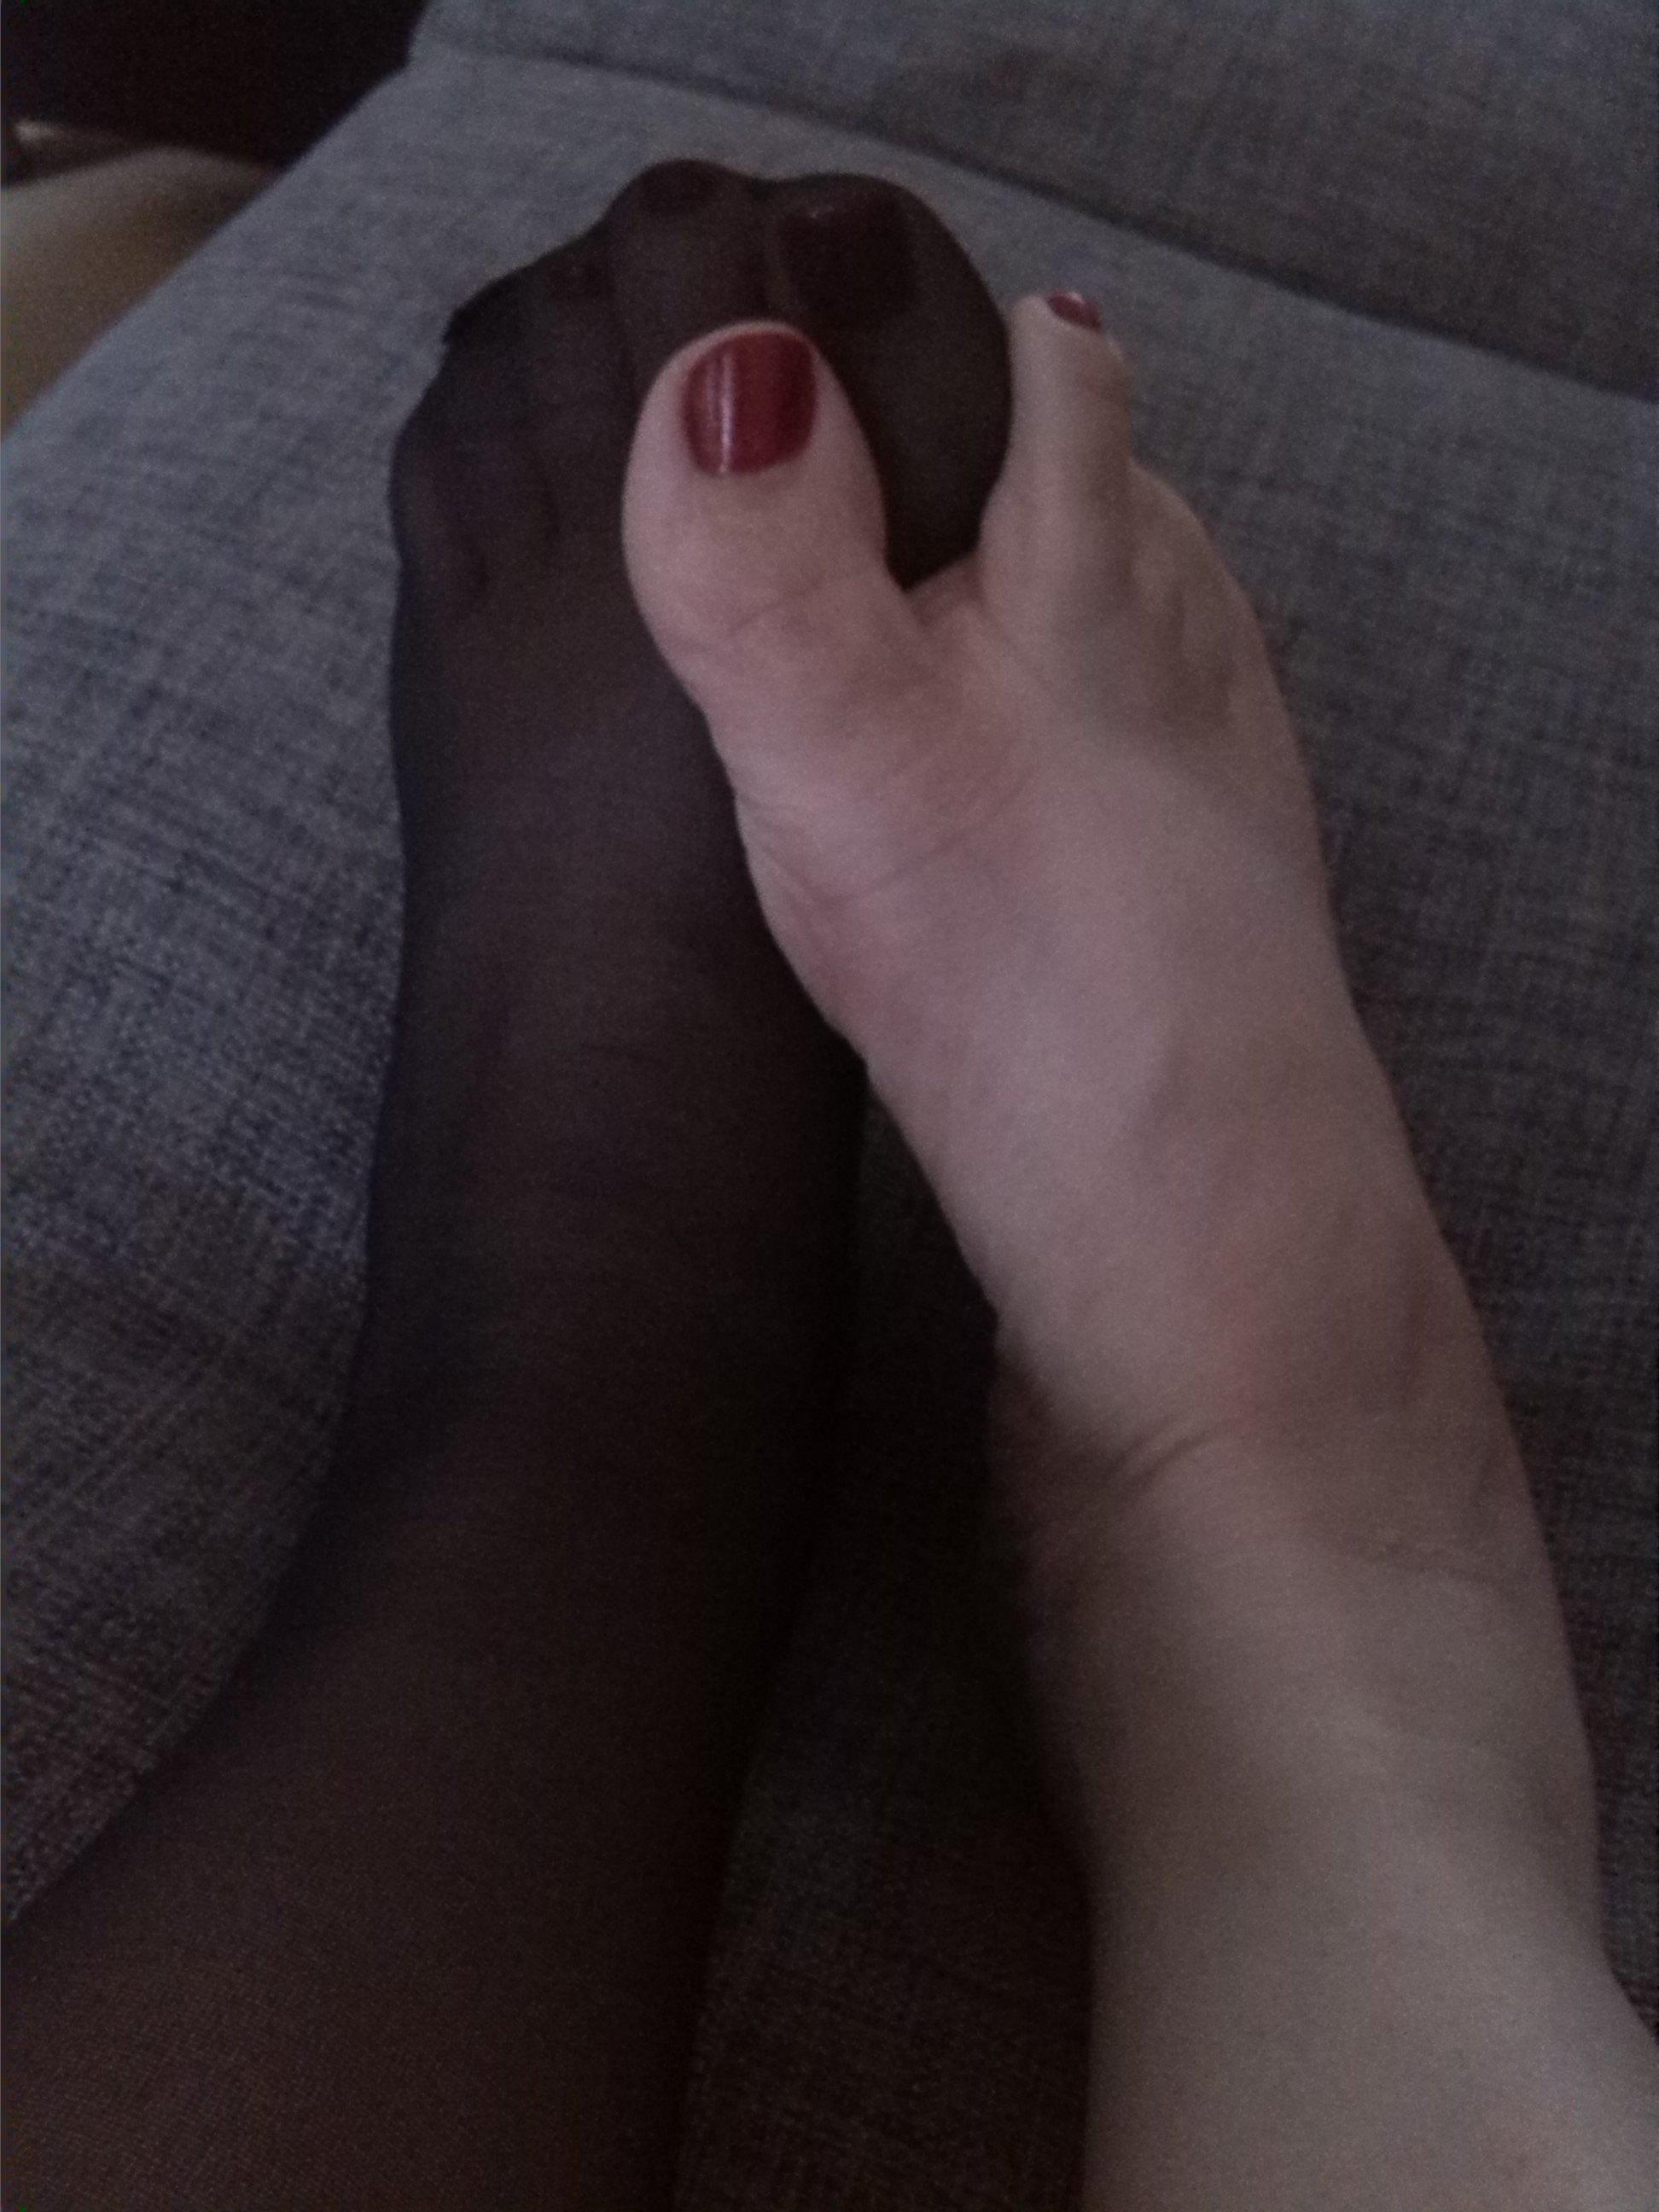 One foot in nylon and one bare with deep red shimmery polish